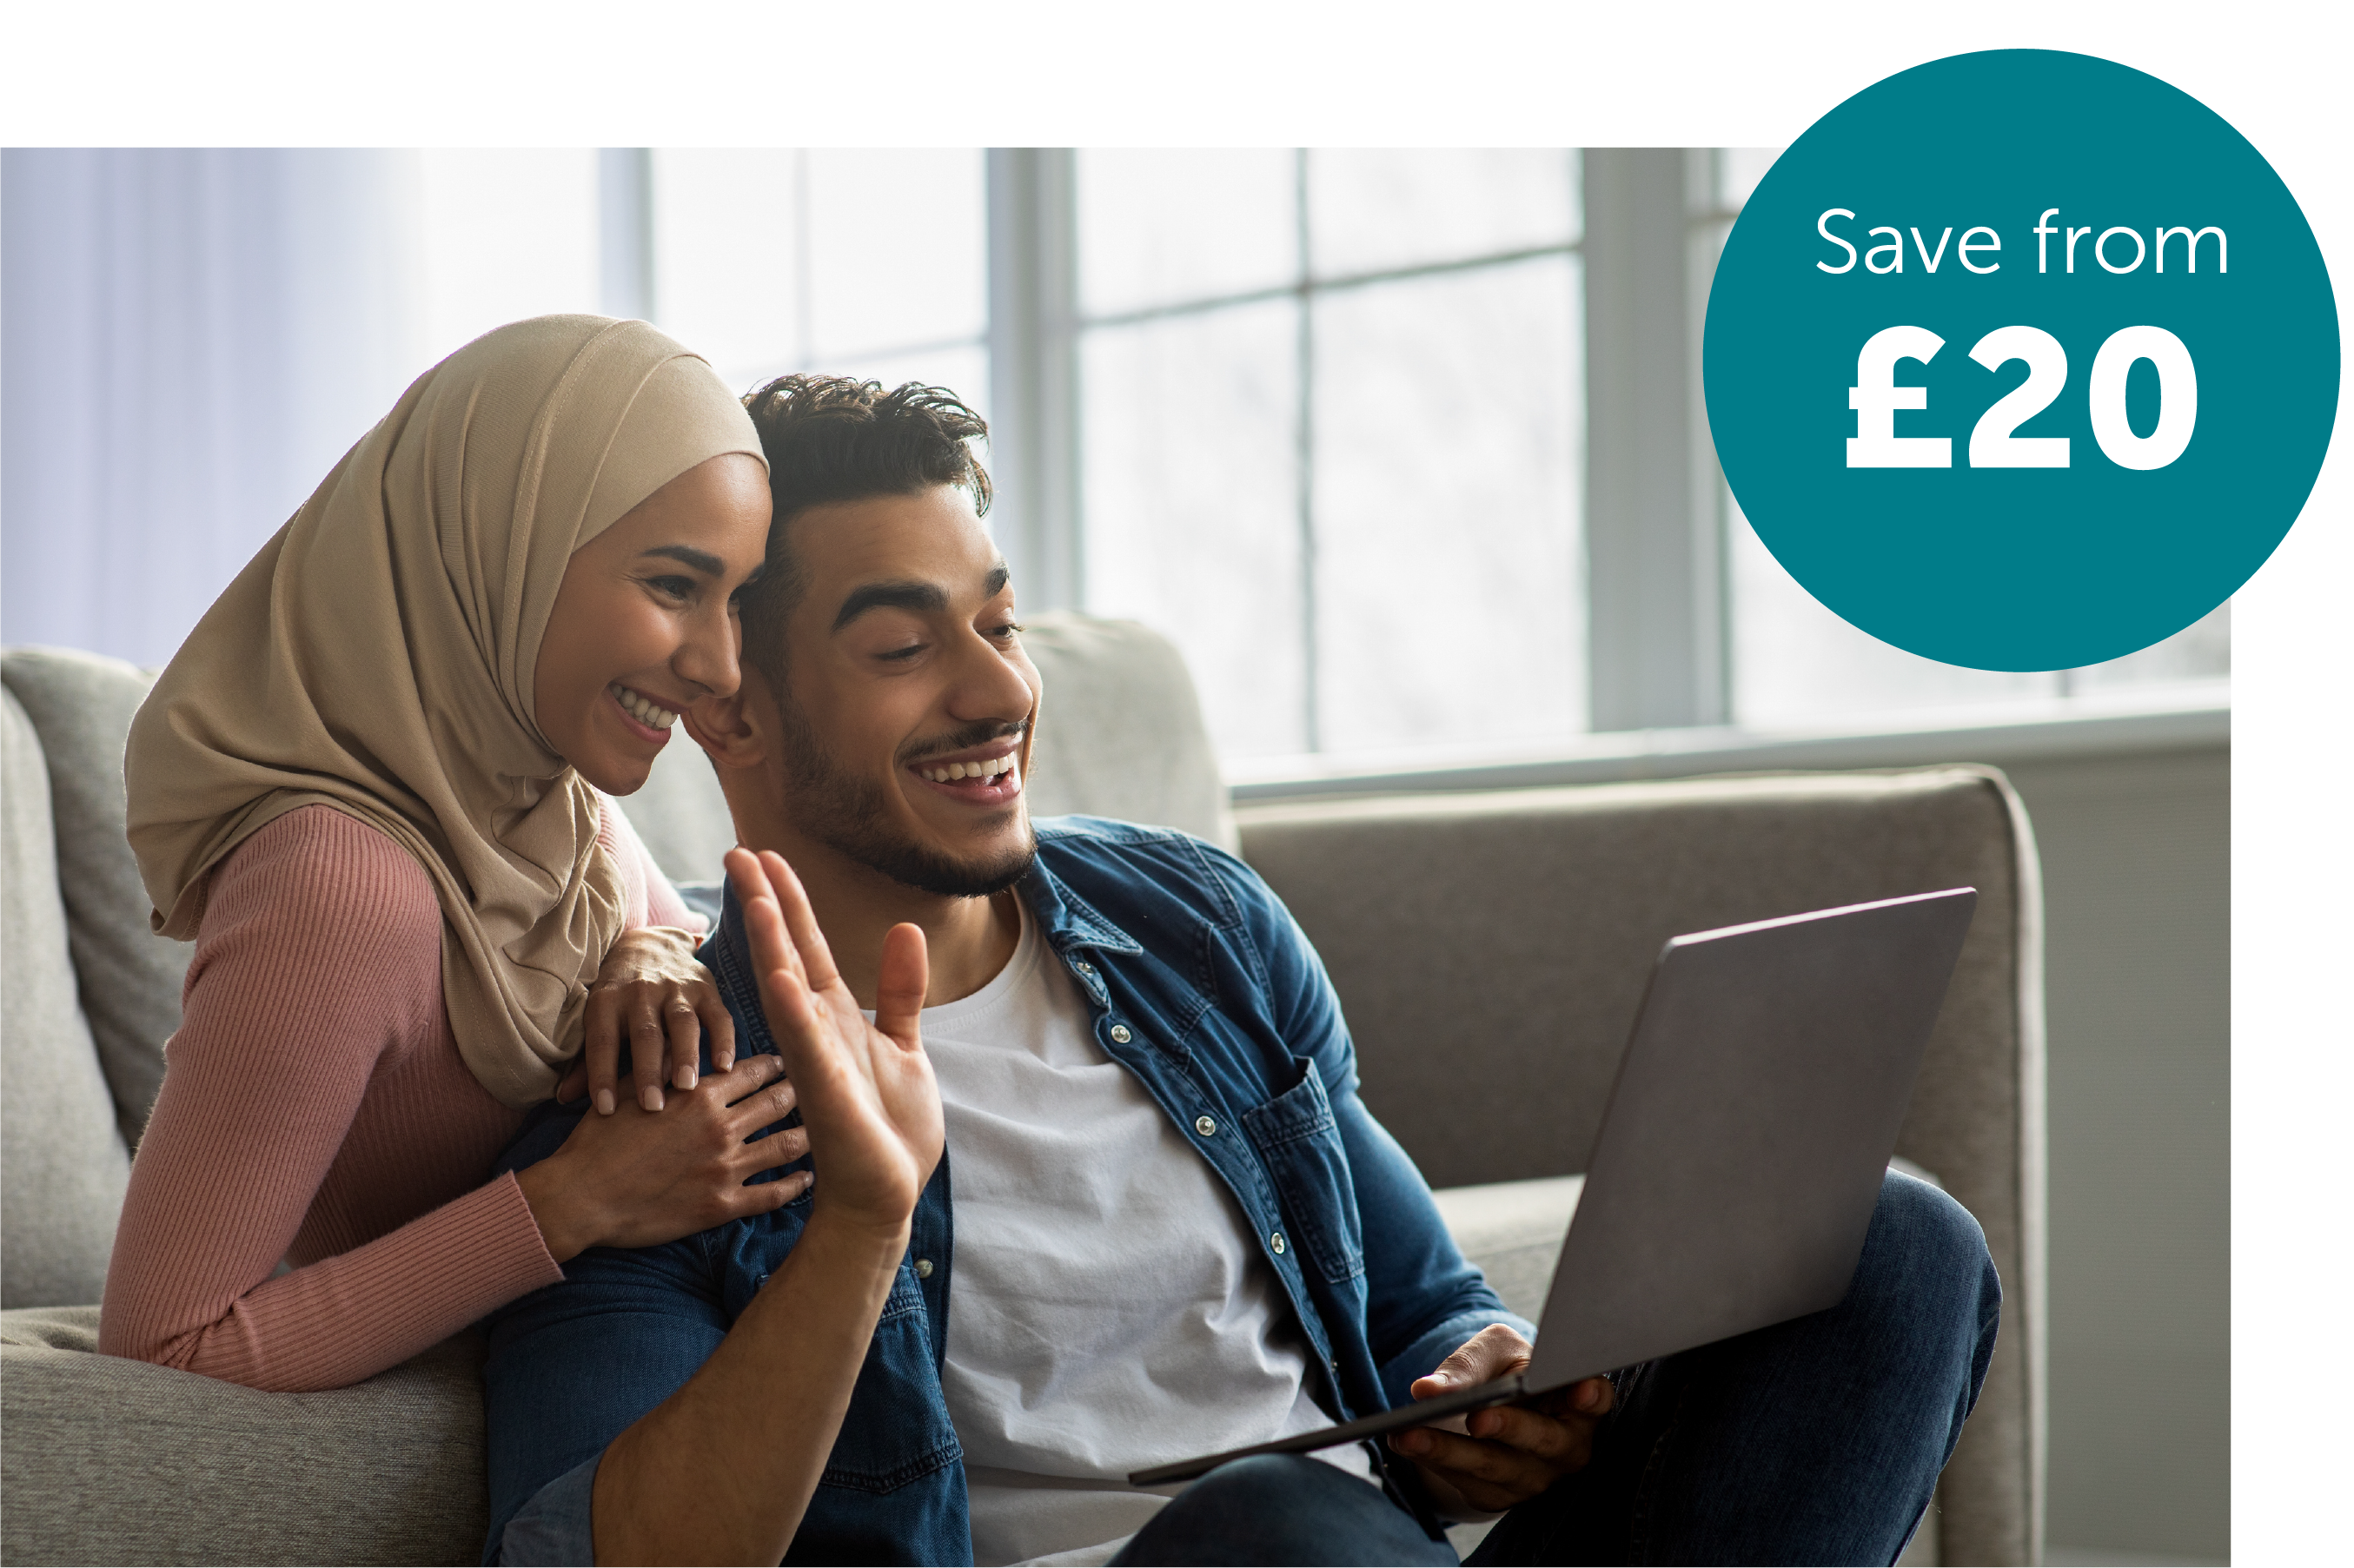 happy couple, start saving from £20